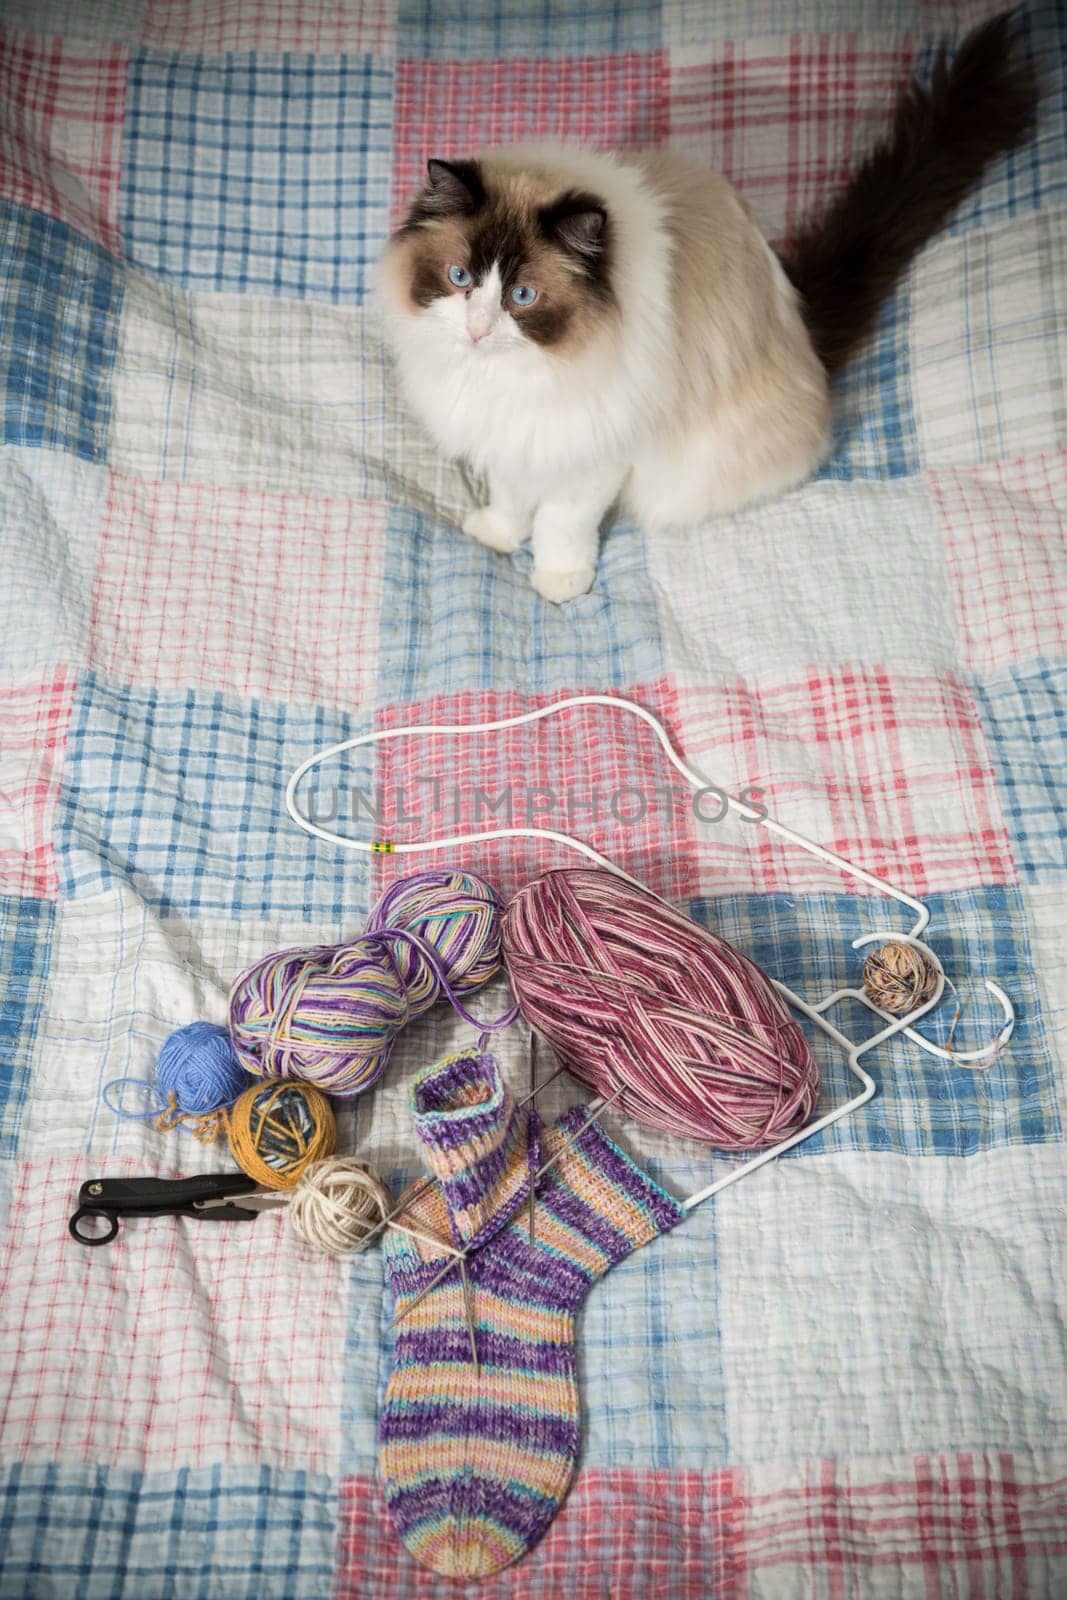 Colored threads, knitting needles and other items for hand knitting and a cute domestic cat Ragdoll on the bed.